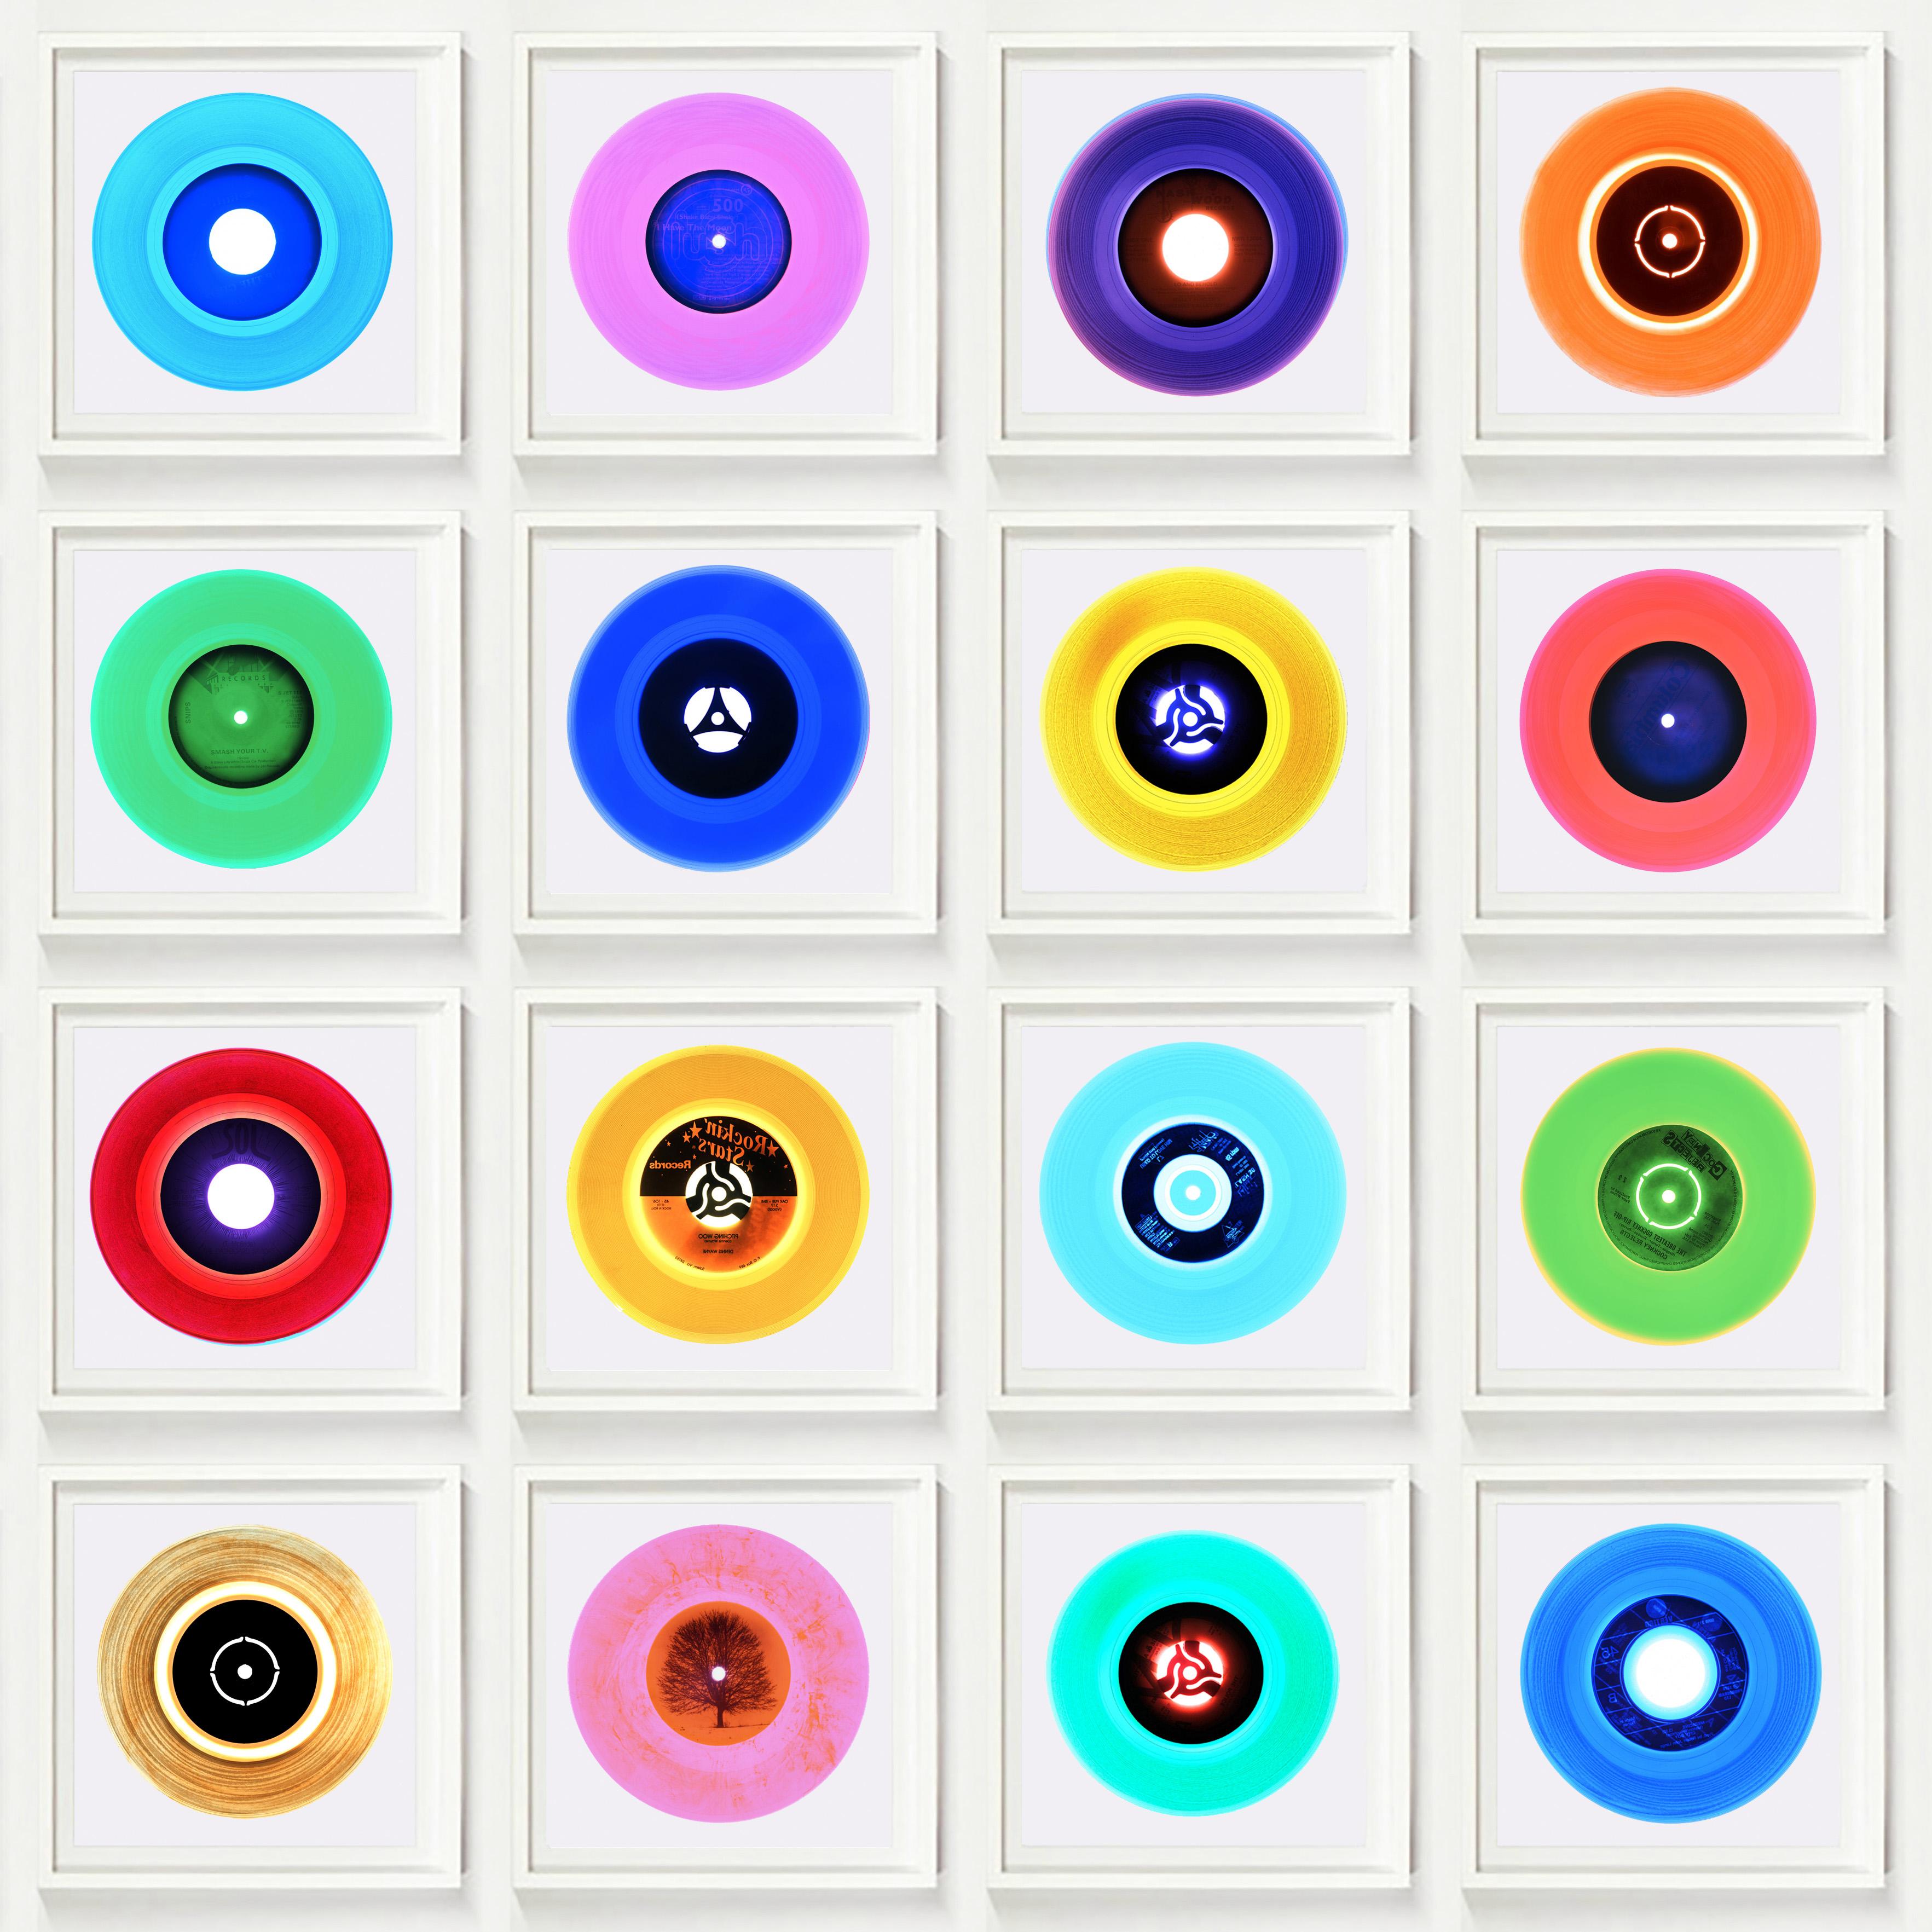 Heidler & Heeps B Side Vinyl Collection Sixteen Piece Multicolor Square Installation.
Acclaimed contemporary photographers, Richard Heeps and Natasha Heidler have collaborated to make this beautifully mesmerising collection. A celebration of the